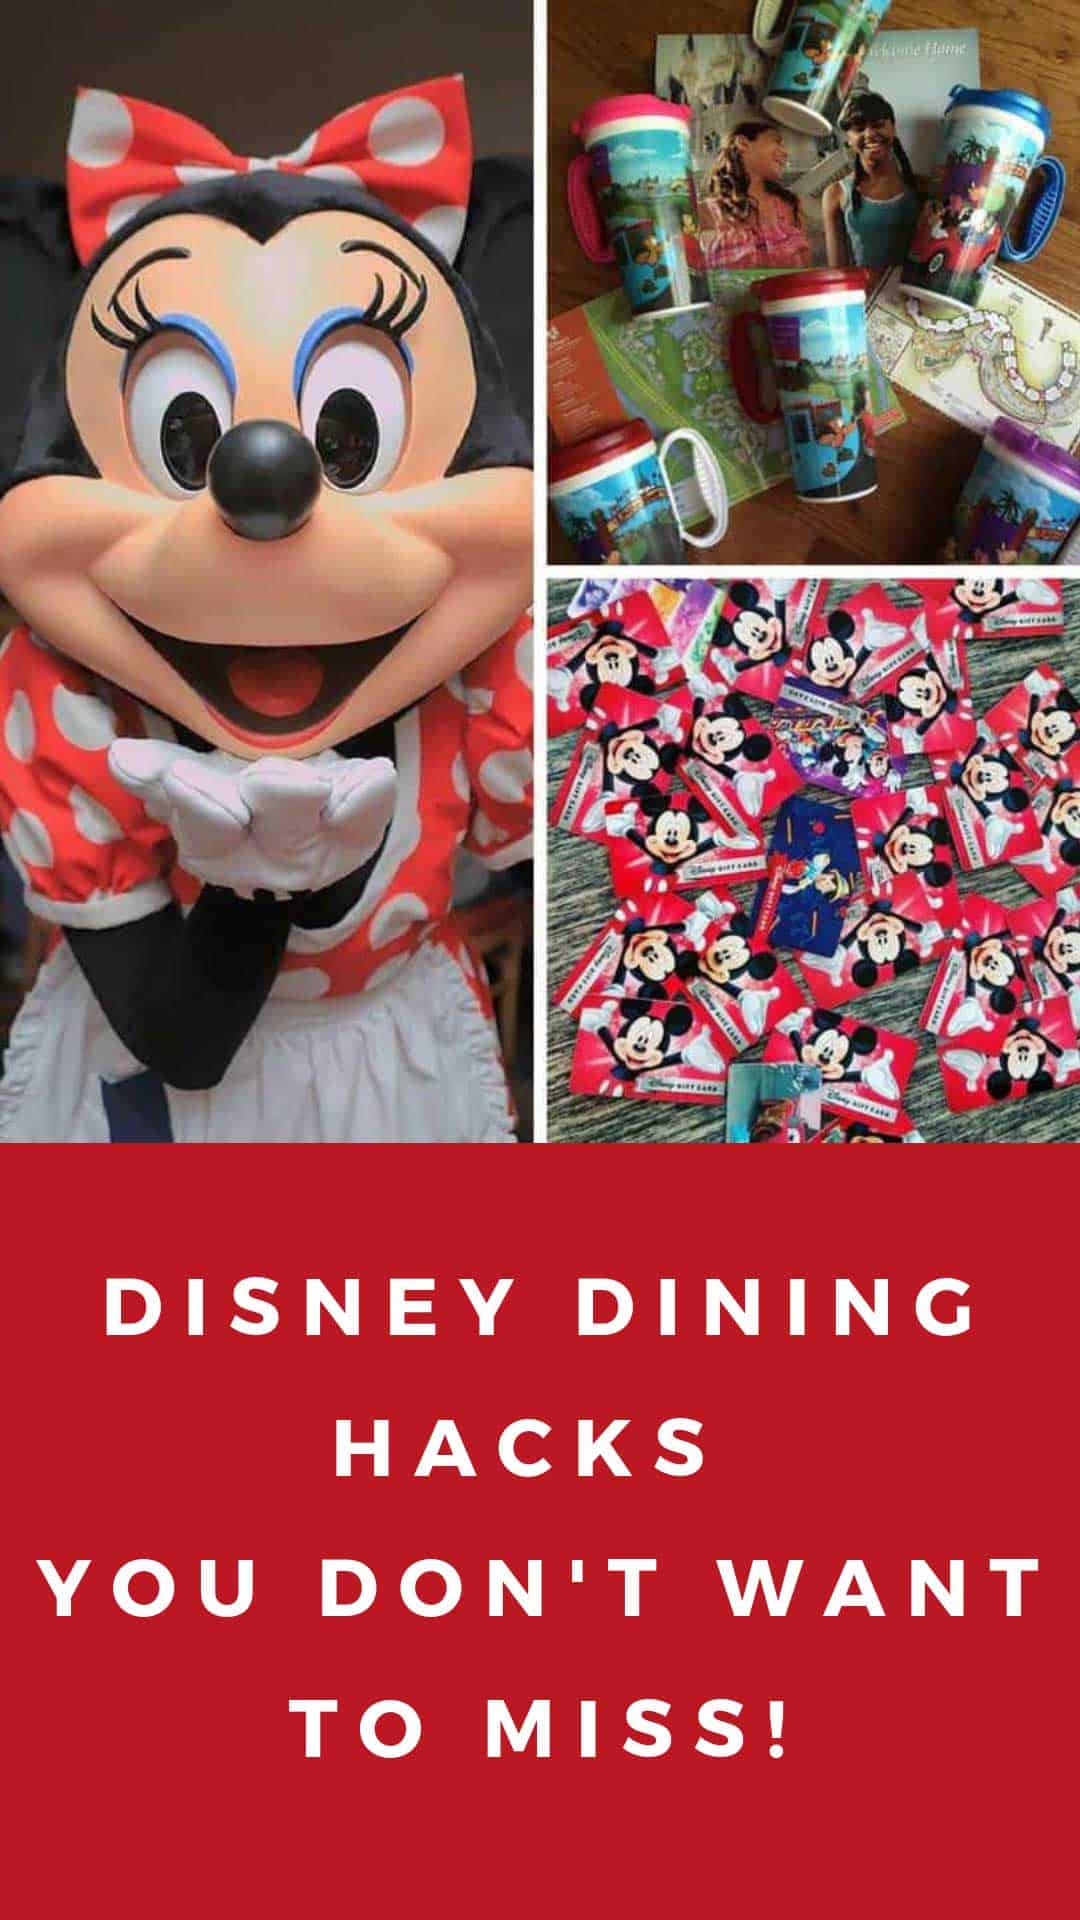 You do not want to miss these Disney dining hacks! All the tips you need to save time and money while eating on vacation